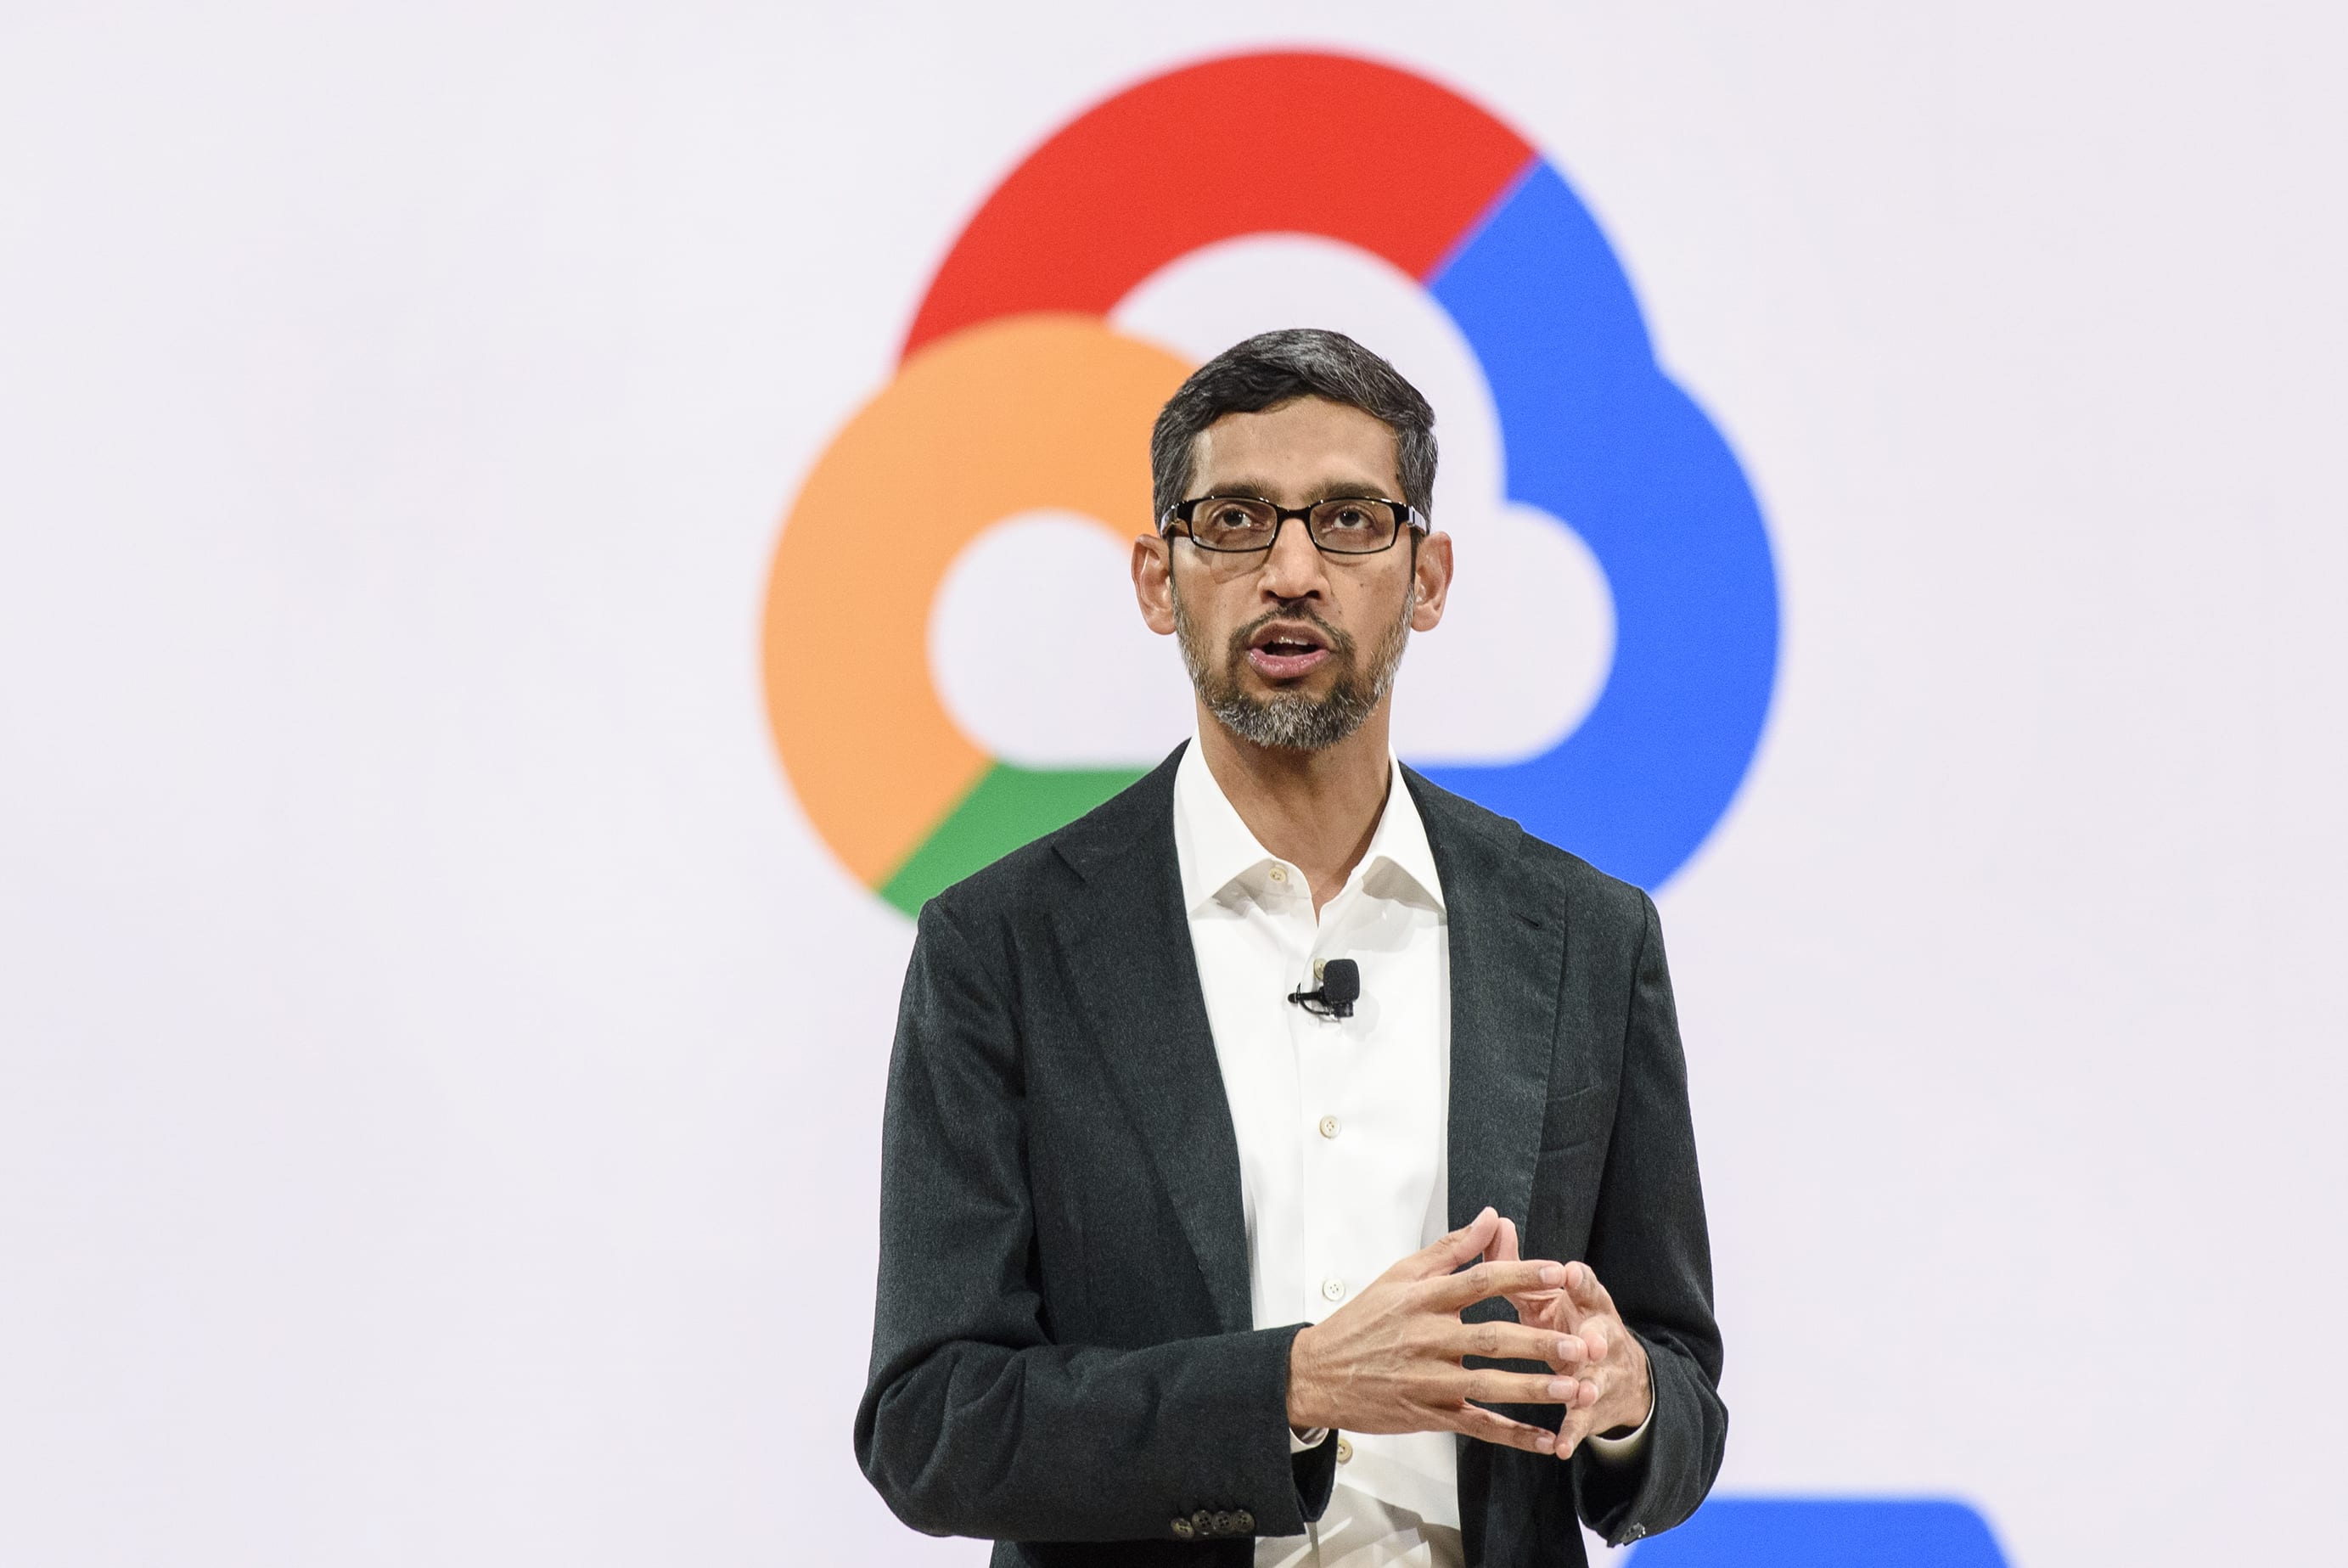 Google is getting into banking with the search giant set to offer checking accounts next year